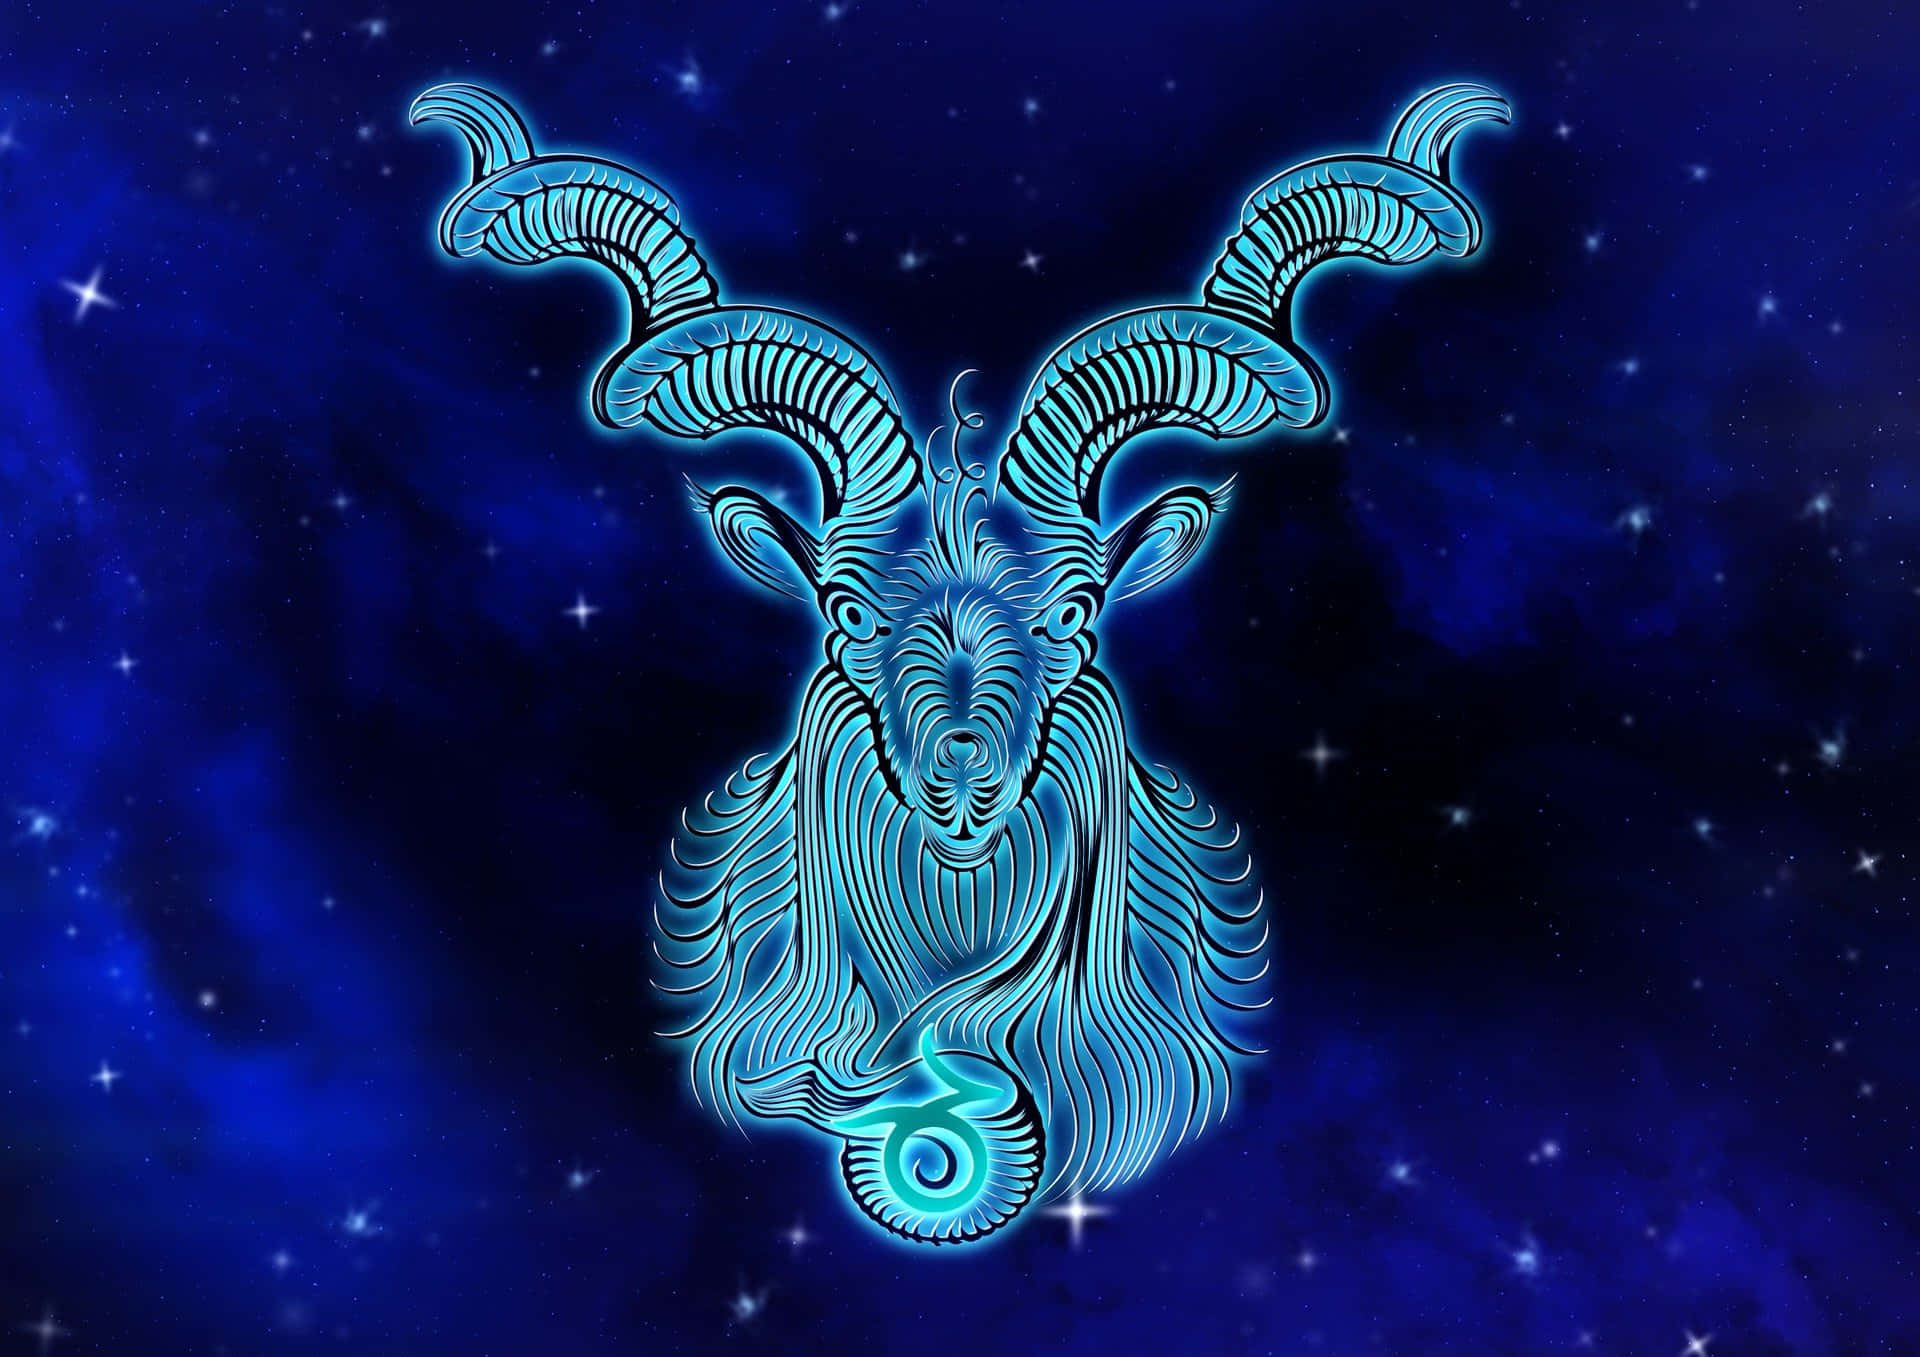 A Goat With Horns On A Blue Background